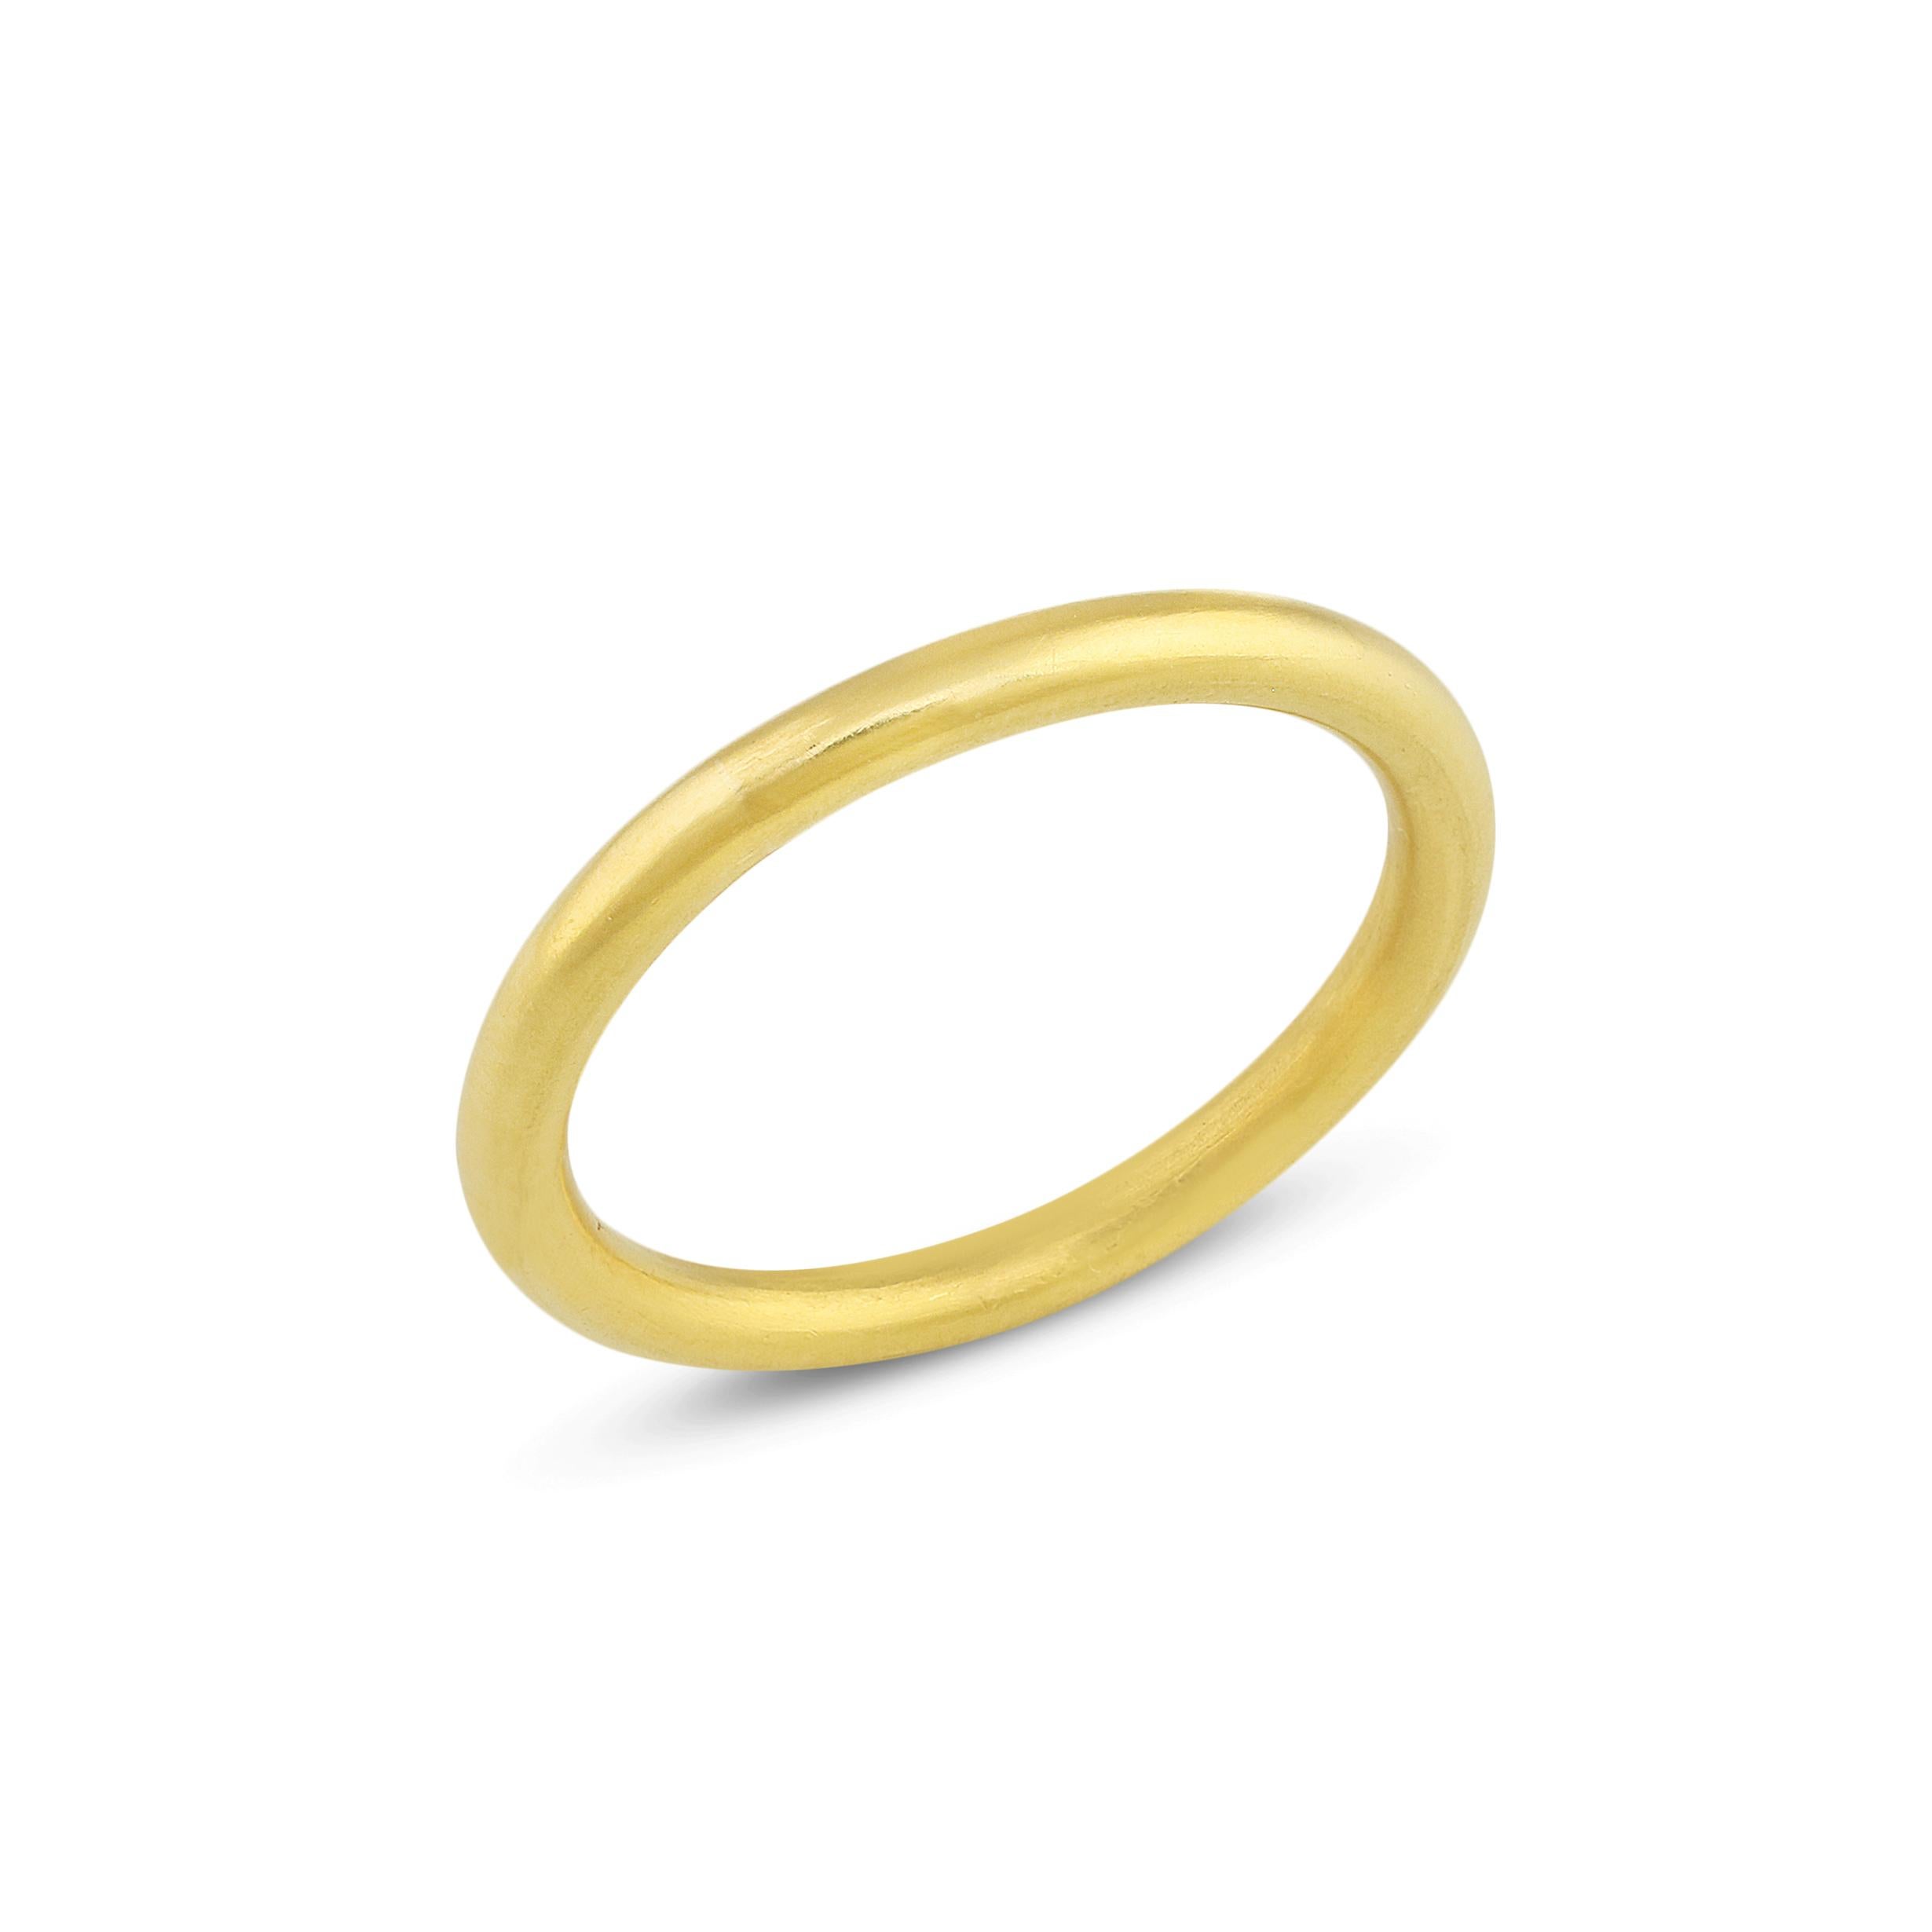 Artisan PHILIPPE SPENCER Solid 20K Gold Hand-Forged 2.3mm Organic Round Ring For Sale